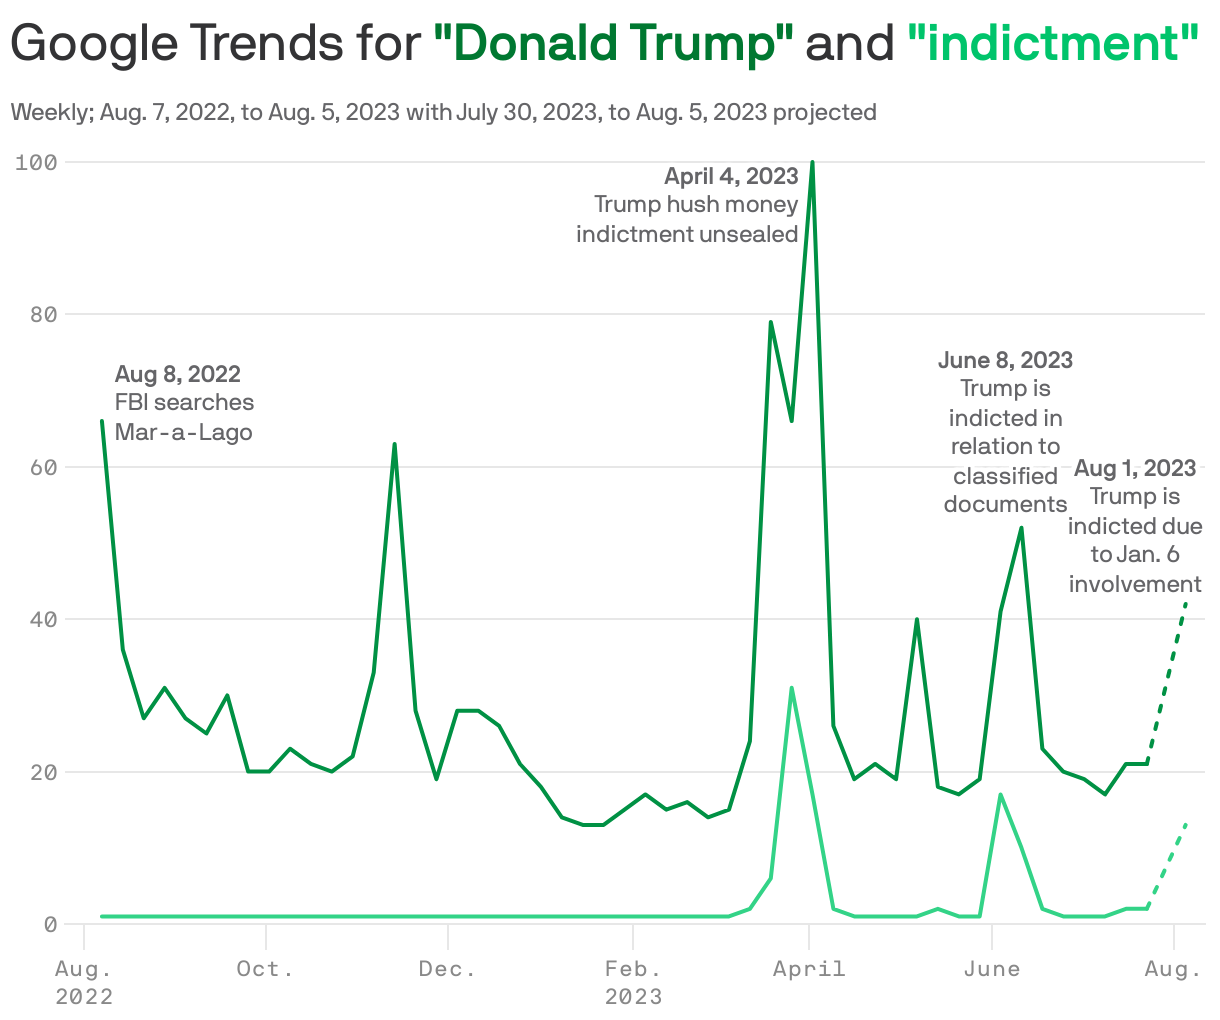 Google Trends for <b style="color:#007831; font-weight:900;">"Donald Trump"</b> and <b style="color:#00c46b; font-weight:900;">"indictment"</b>